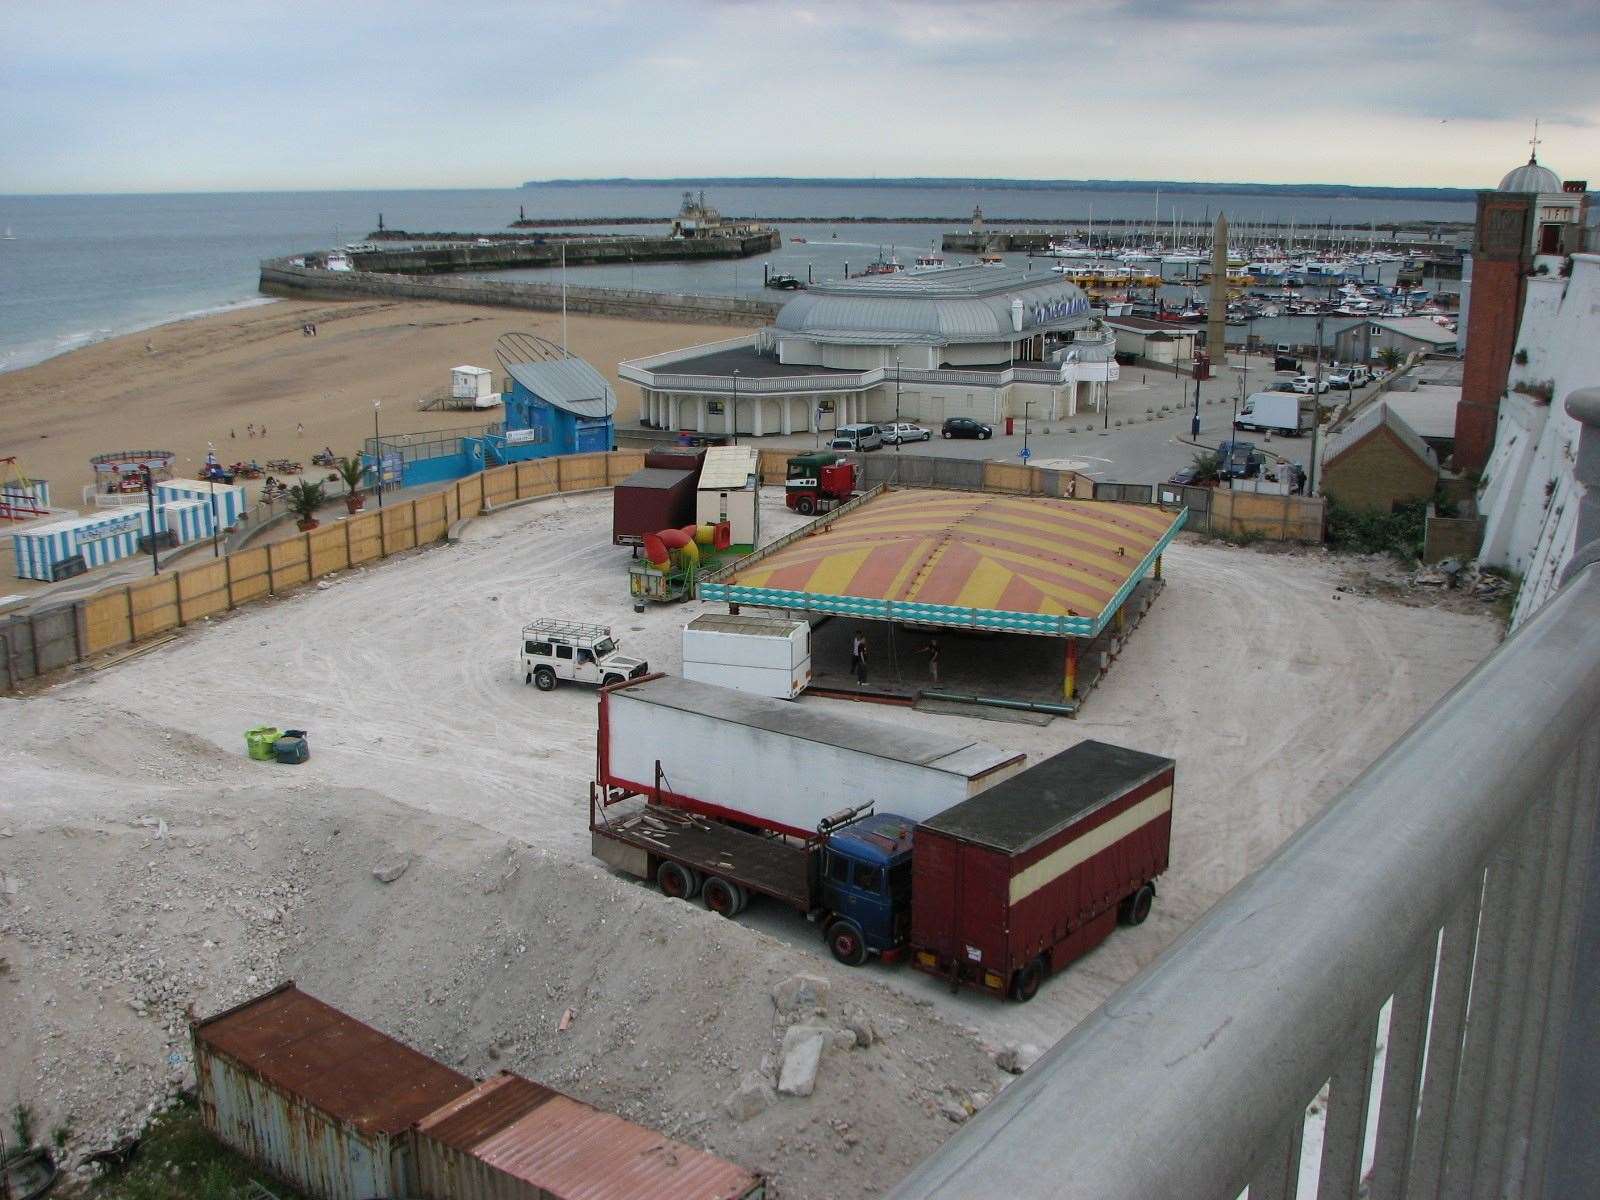 Documents lodged with Companies House last week reveal Martin Rigden is now the majority shareholder of Ramsgate Development Company. Picture: Michael Child